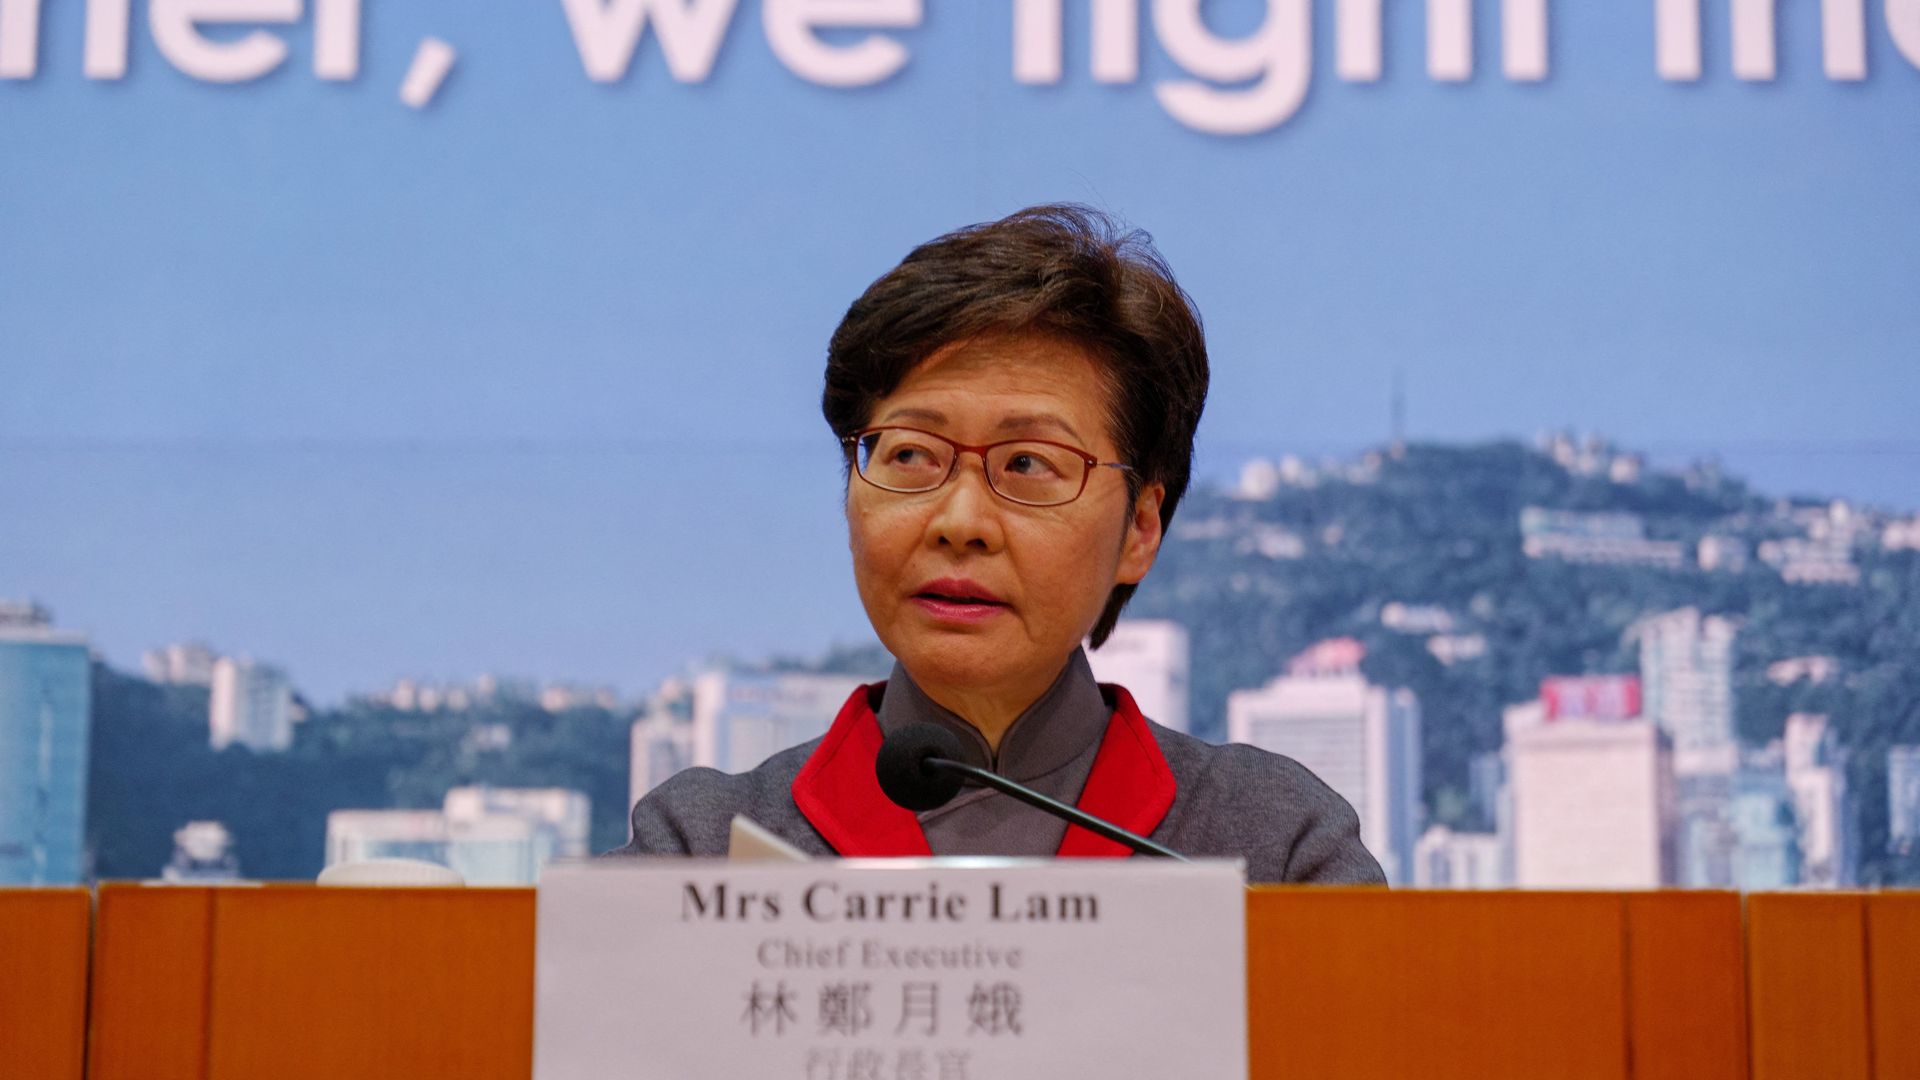 Hong Kong's Chief Executive Carrie Lam holds a press conference as her government announces strict new anti-coronavirus controls in Hong Kong on January 5, 2022.